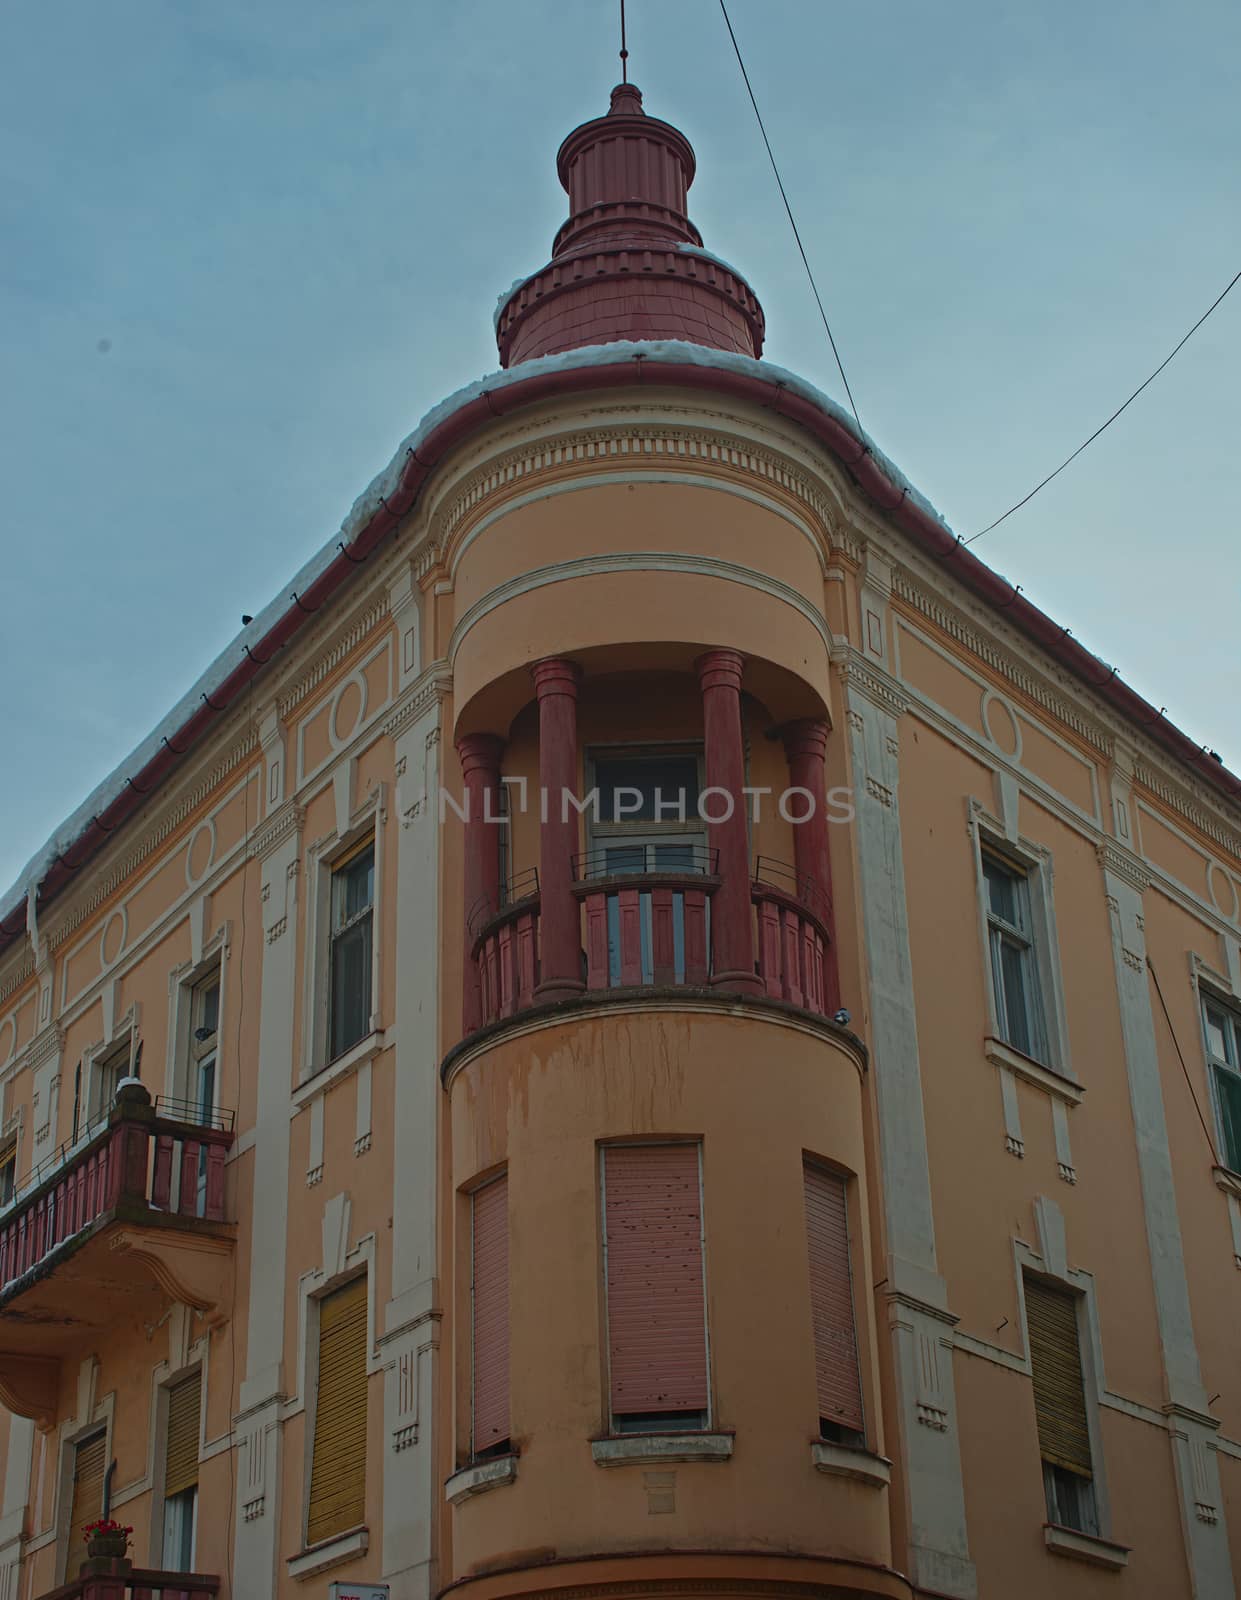 Top corner of an old style building with an orange facade